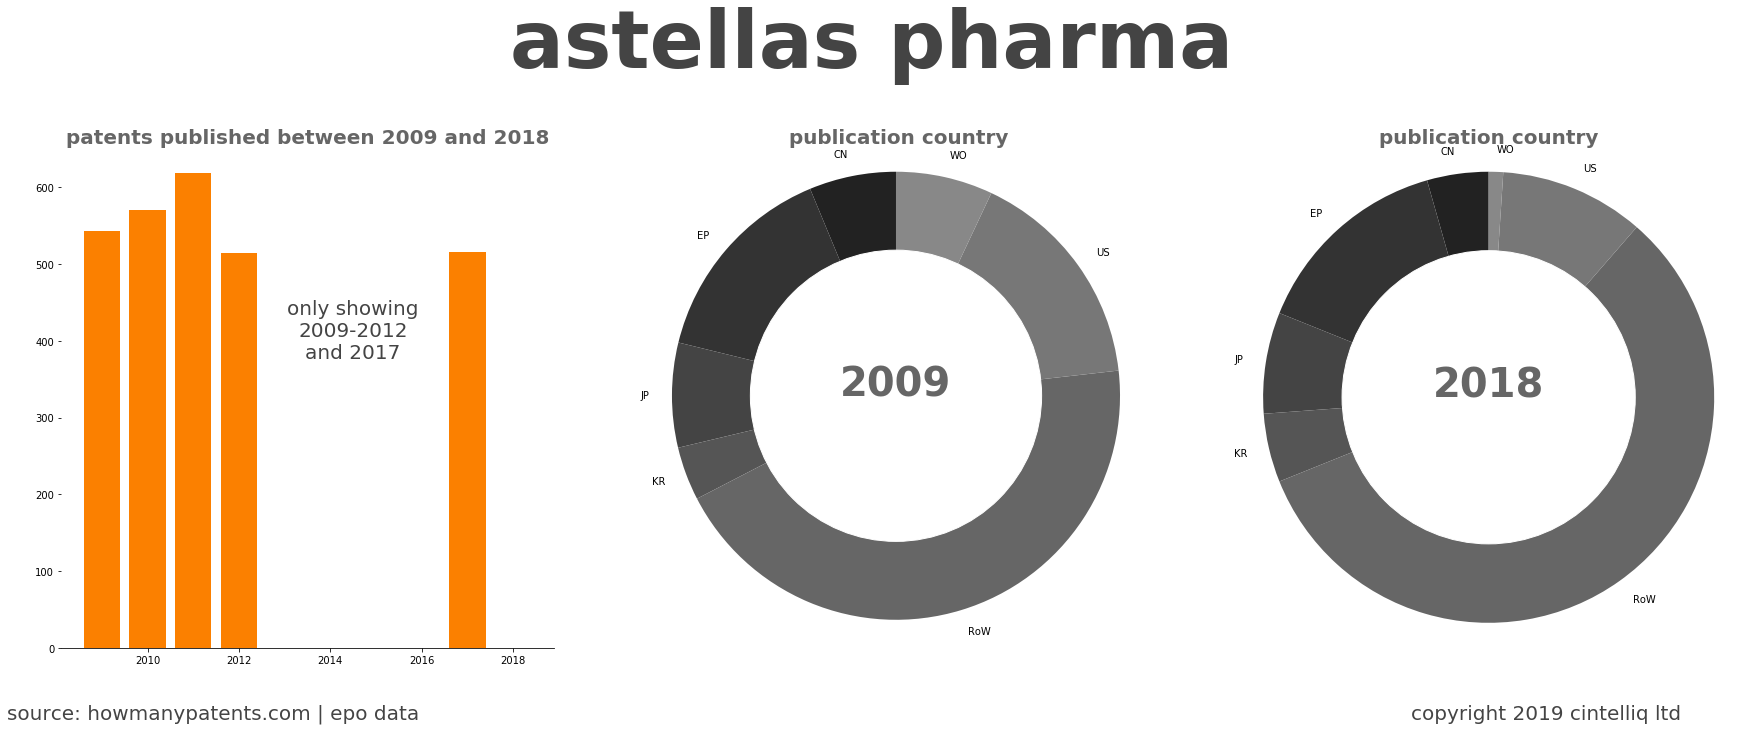 summary of patents for Astellas Pharma